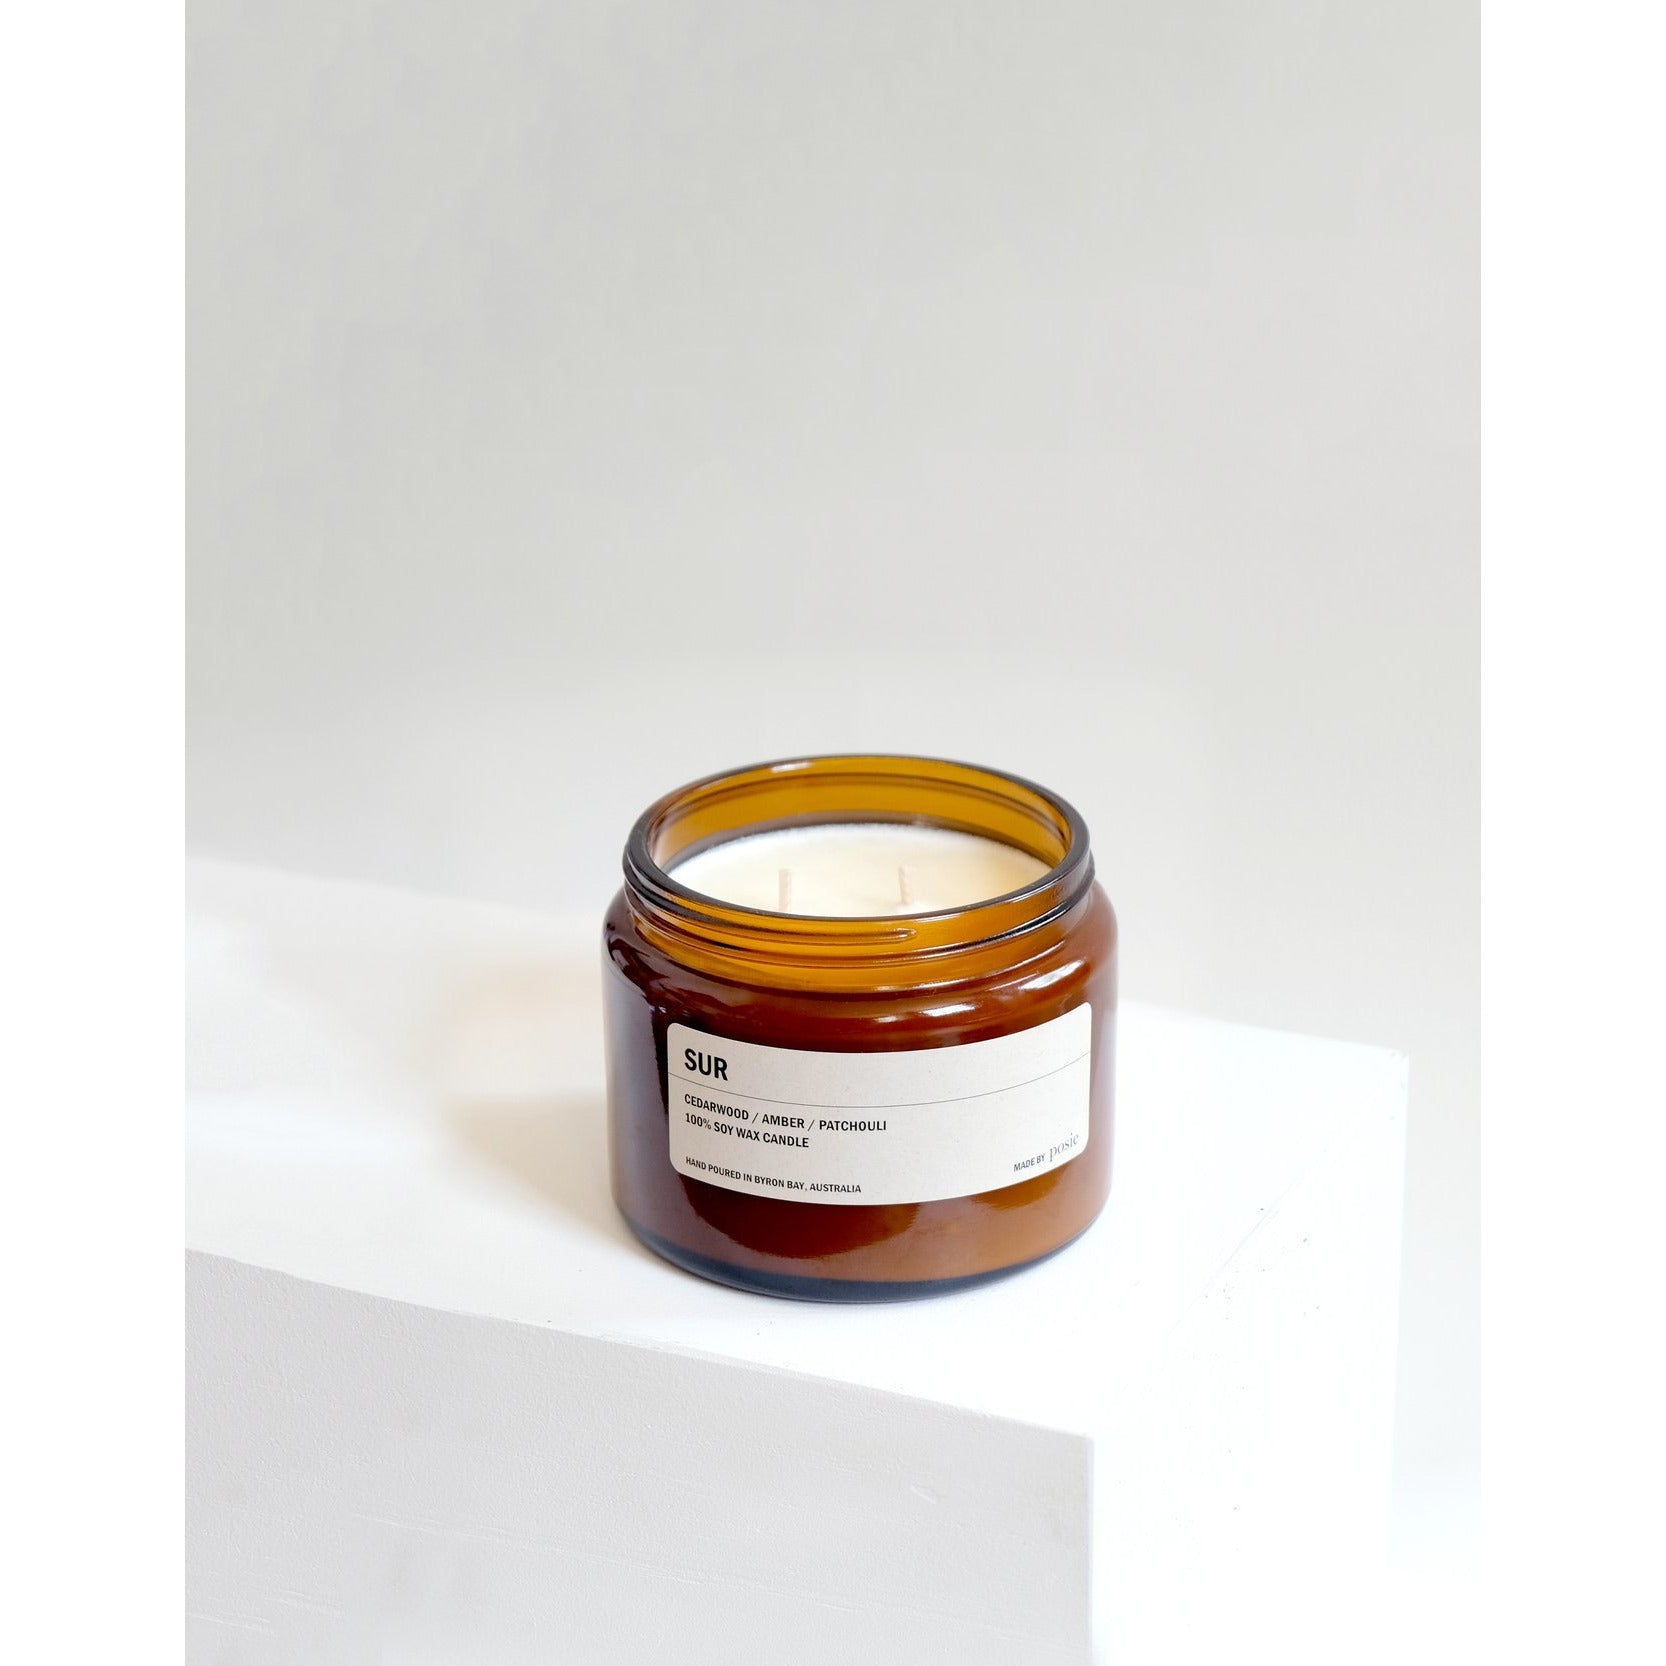 500g Amber Soy Candle - SUR - Prae Store